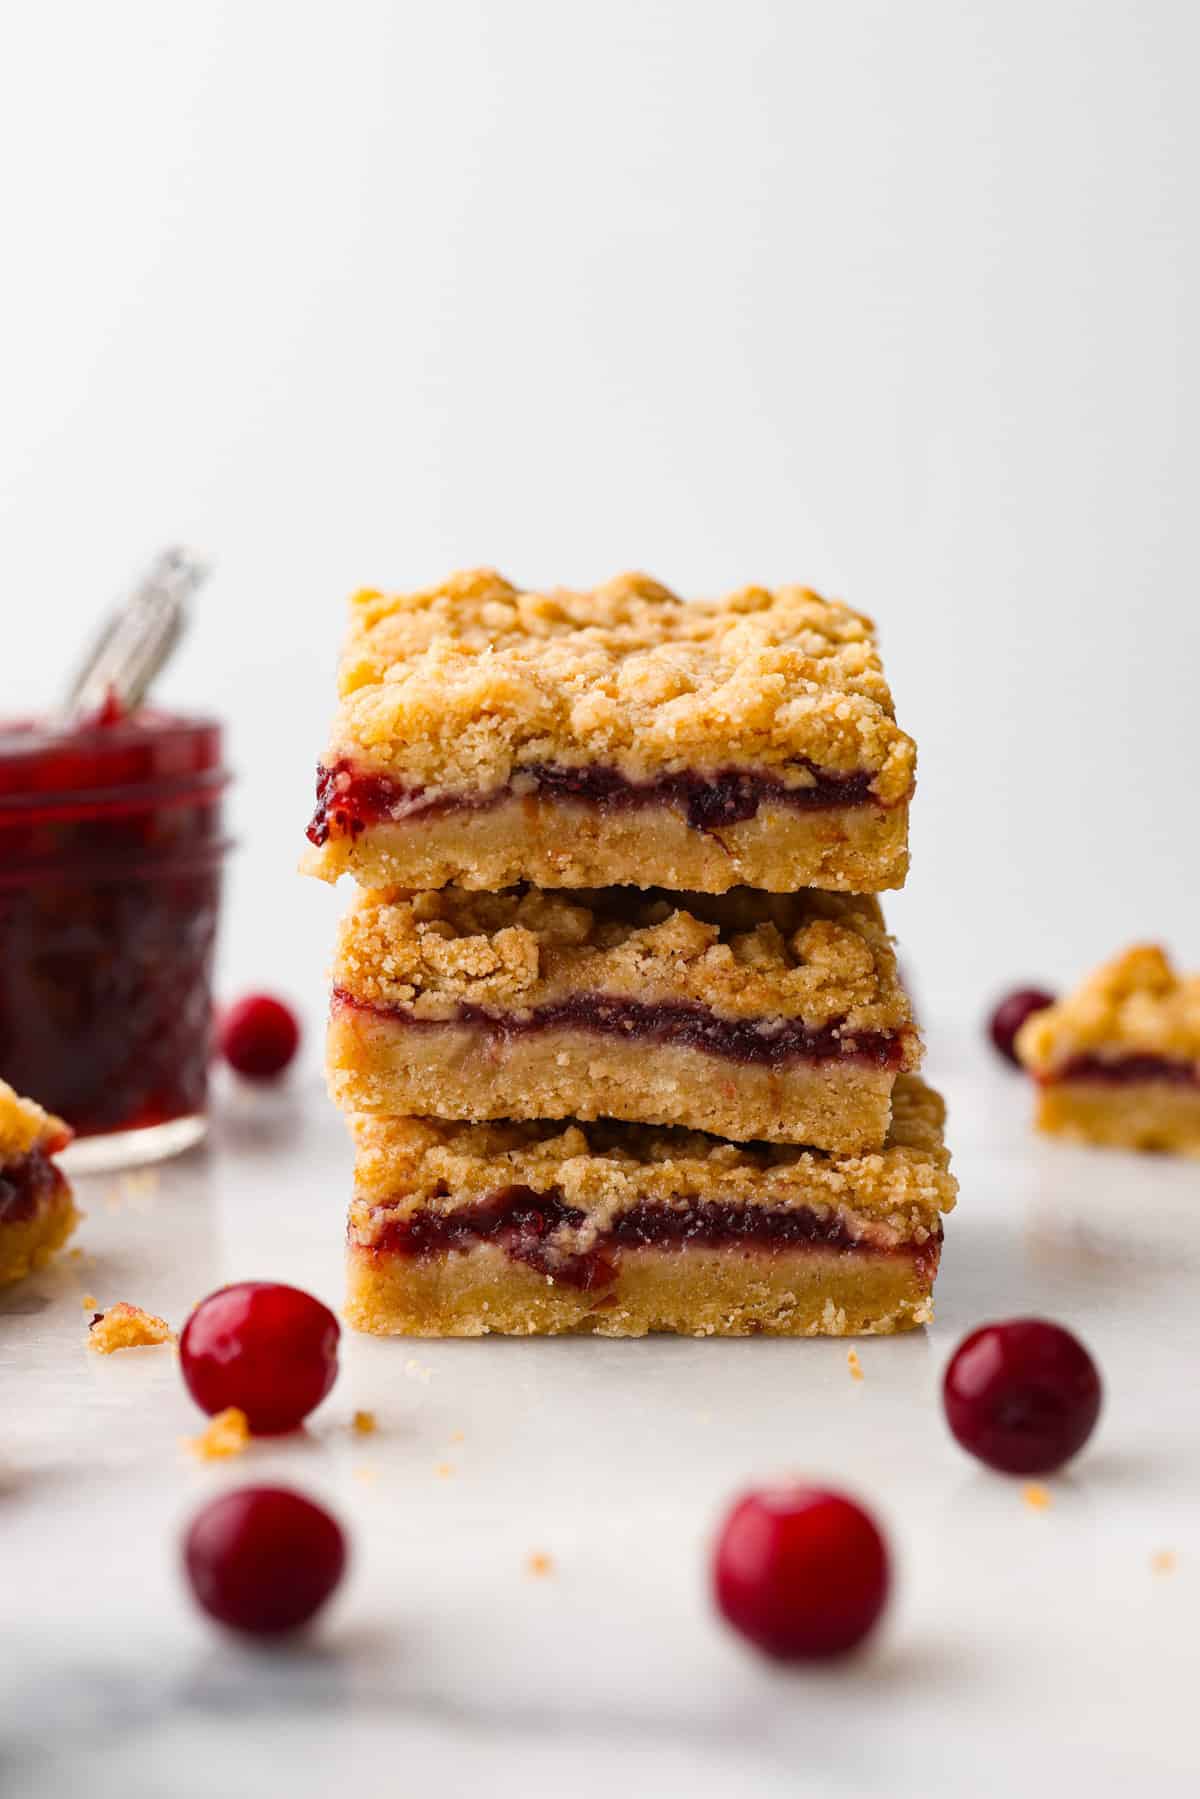 Cranberry Bars (Tart and Buttery!)